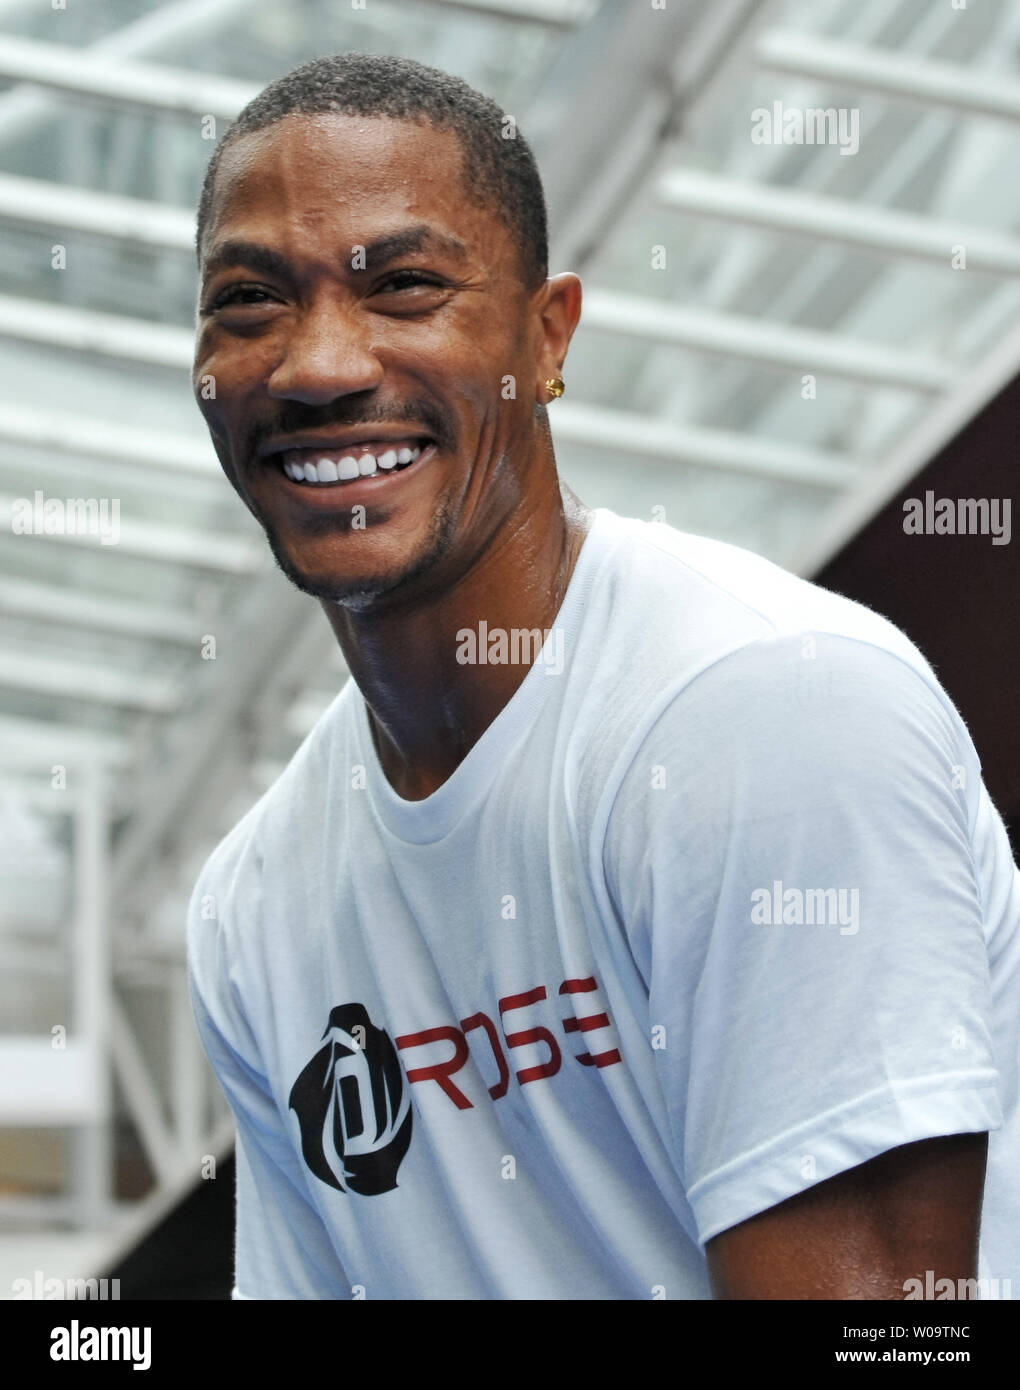 Chicago Bulls guard Derrick Rose attends an event in Tokyo, Japan, on  September 7, 2013. From September 6th through the 14th Derrick will visit  Tokyo, Japan, Manila, Philippines, Beijing, Wuhan, Shenzhen, and